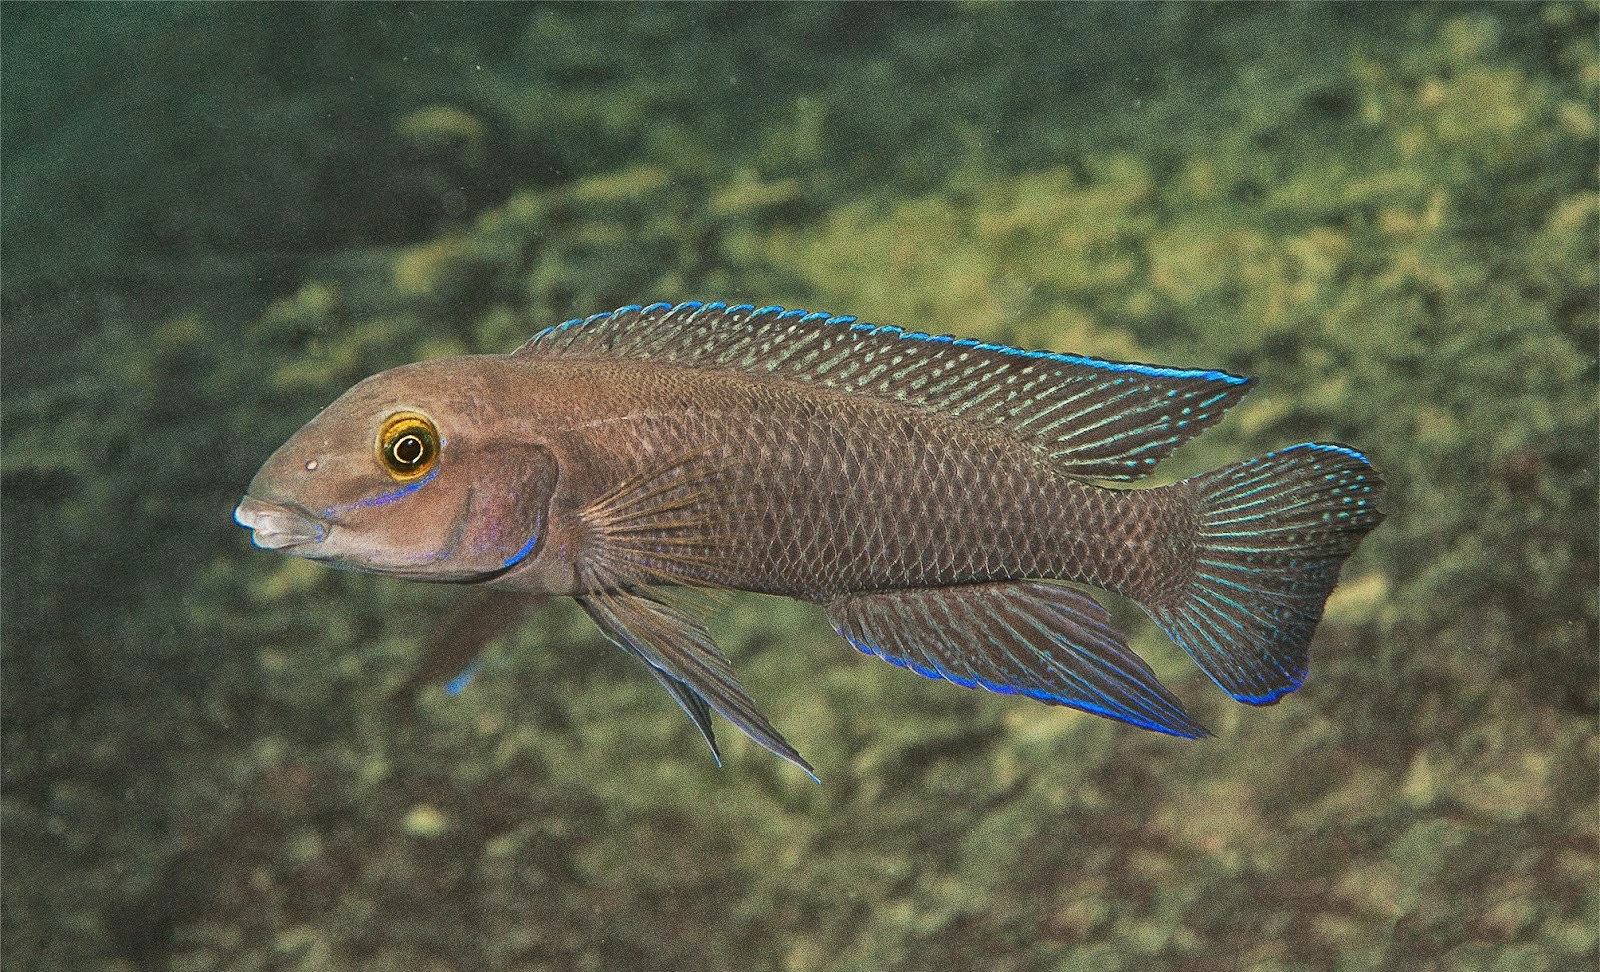 http://sciencythoughts.blogspot.co.uk/2014/05/a-new-species-of-cichlid-fish-from-lake.html